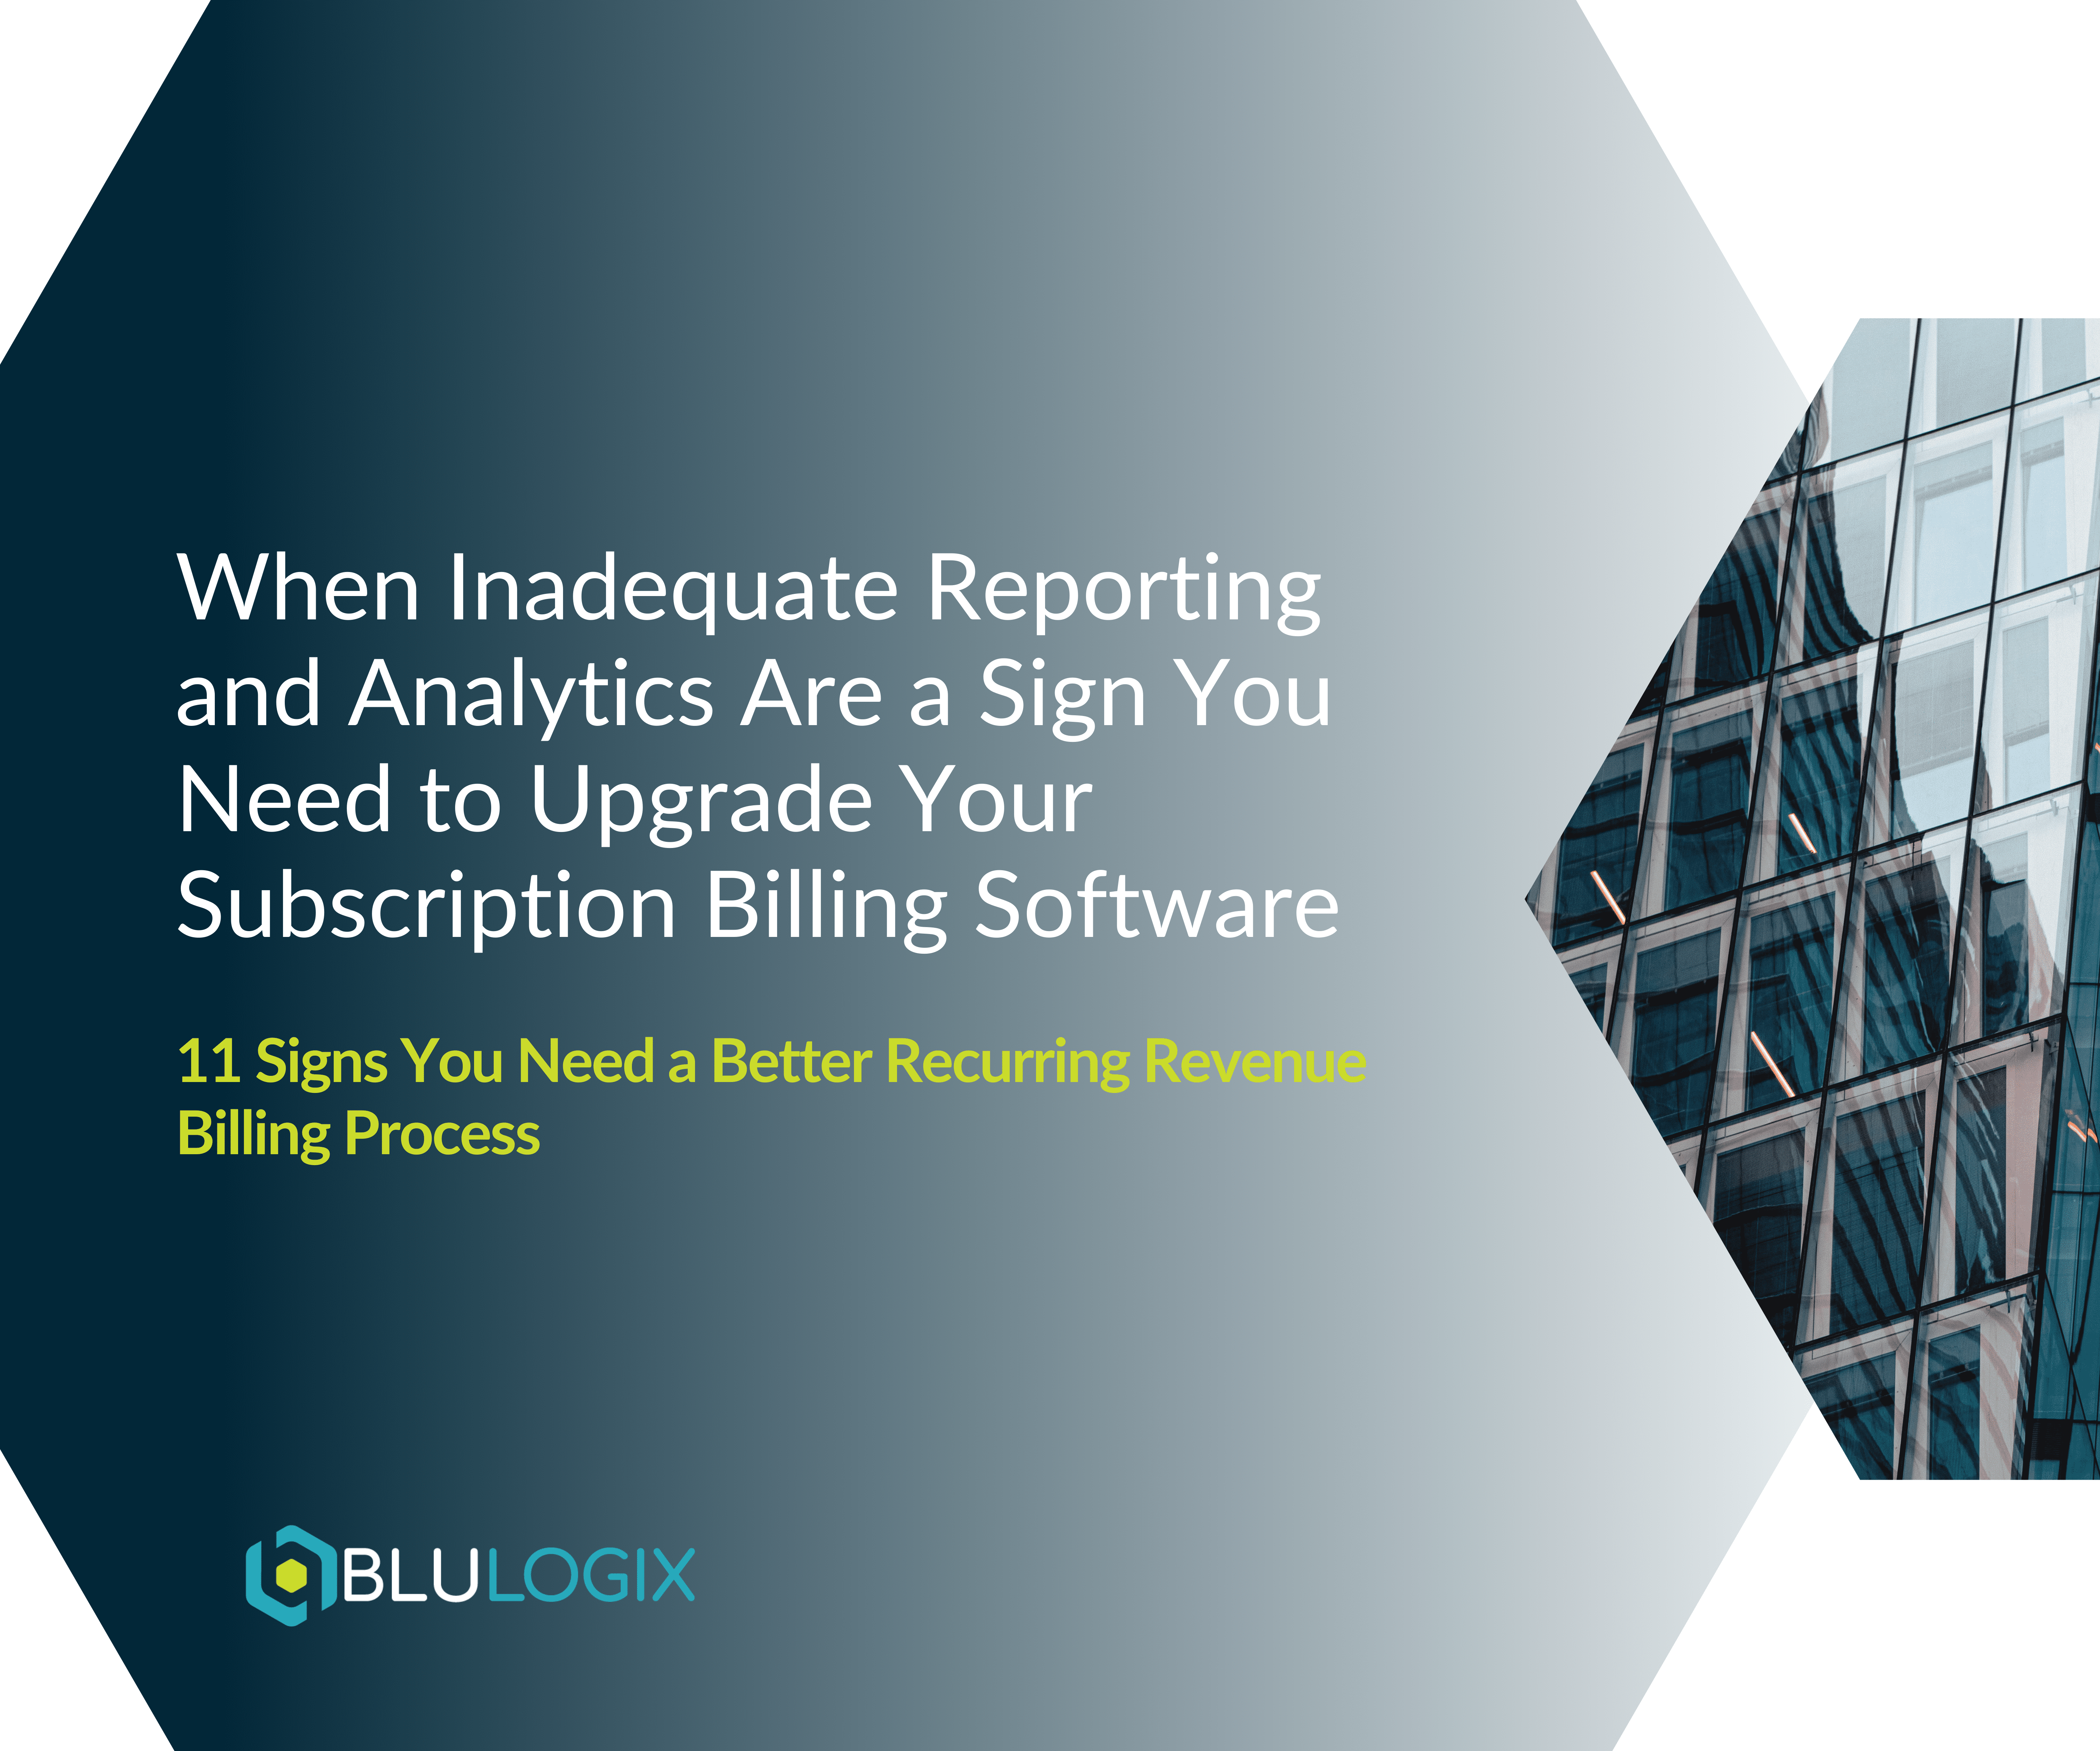 When Inadequate Reporting and Analytics Are a Sign You Need to Upgrade Your Subscription Billing Software